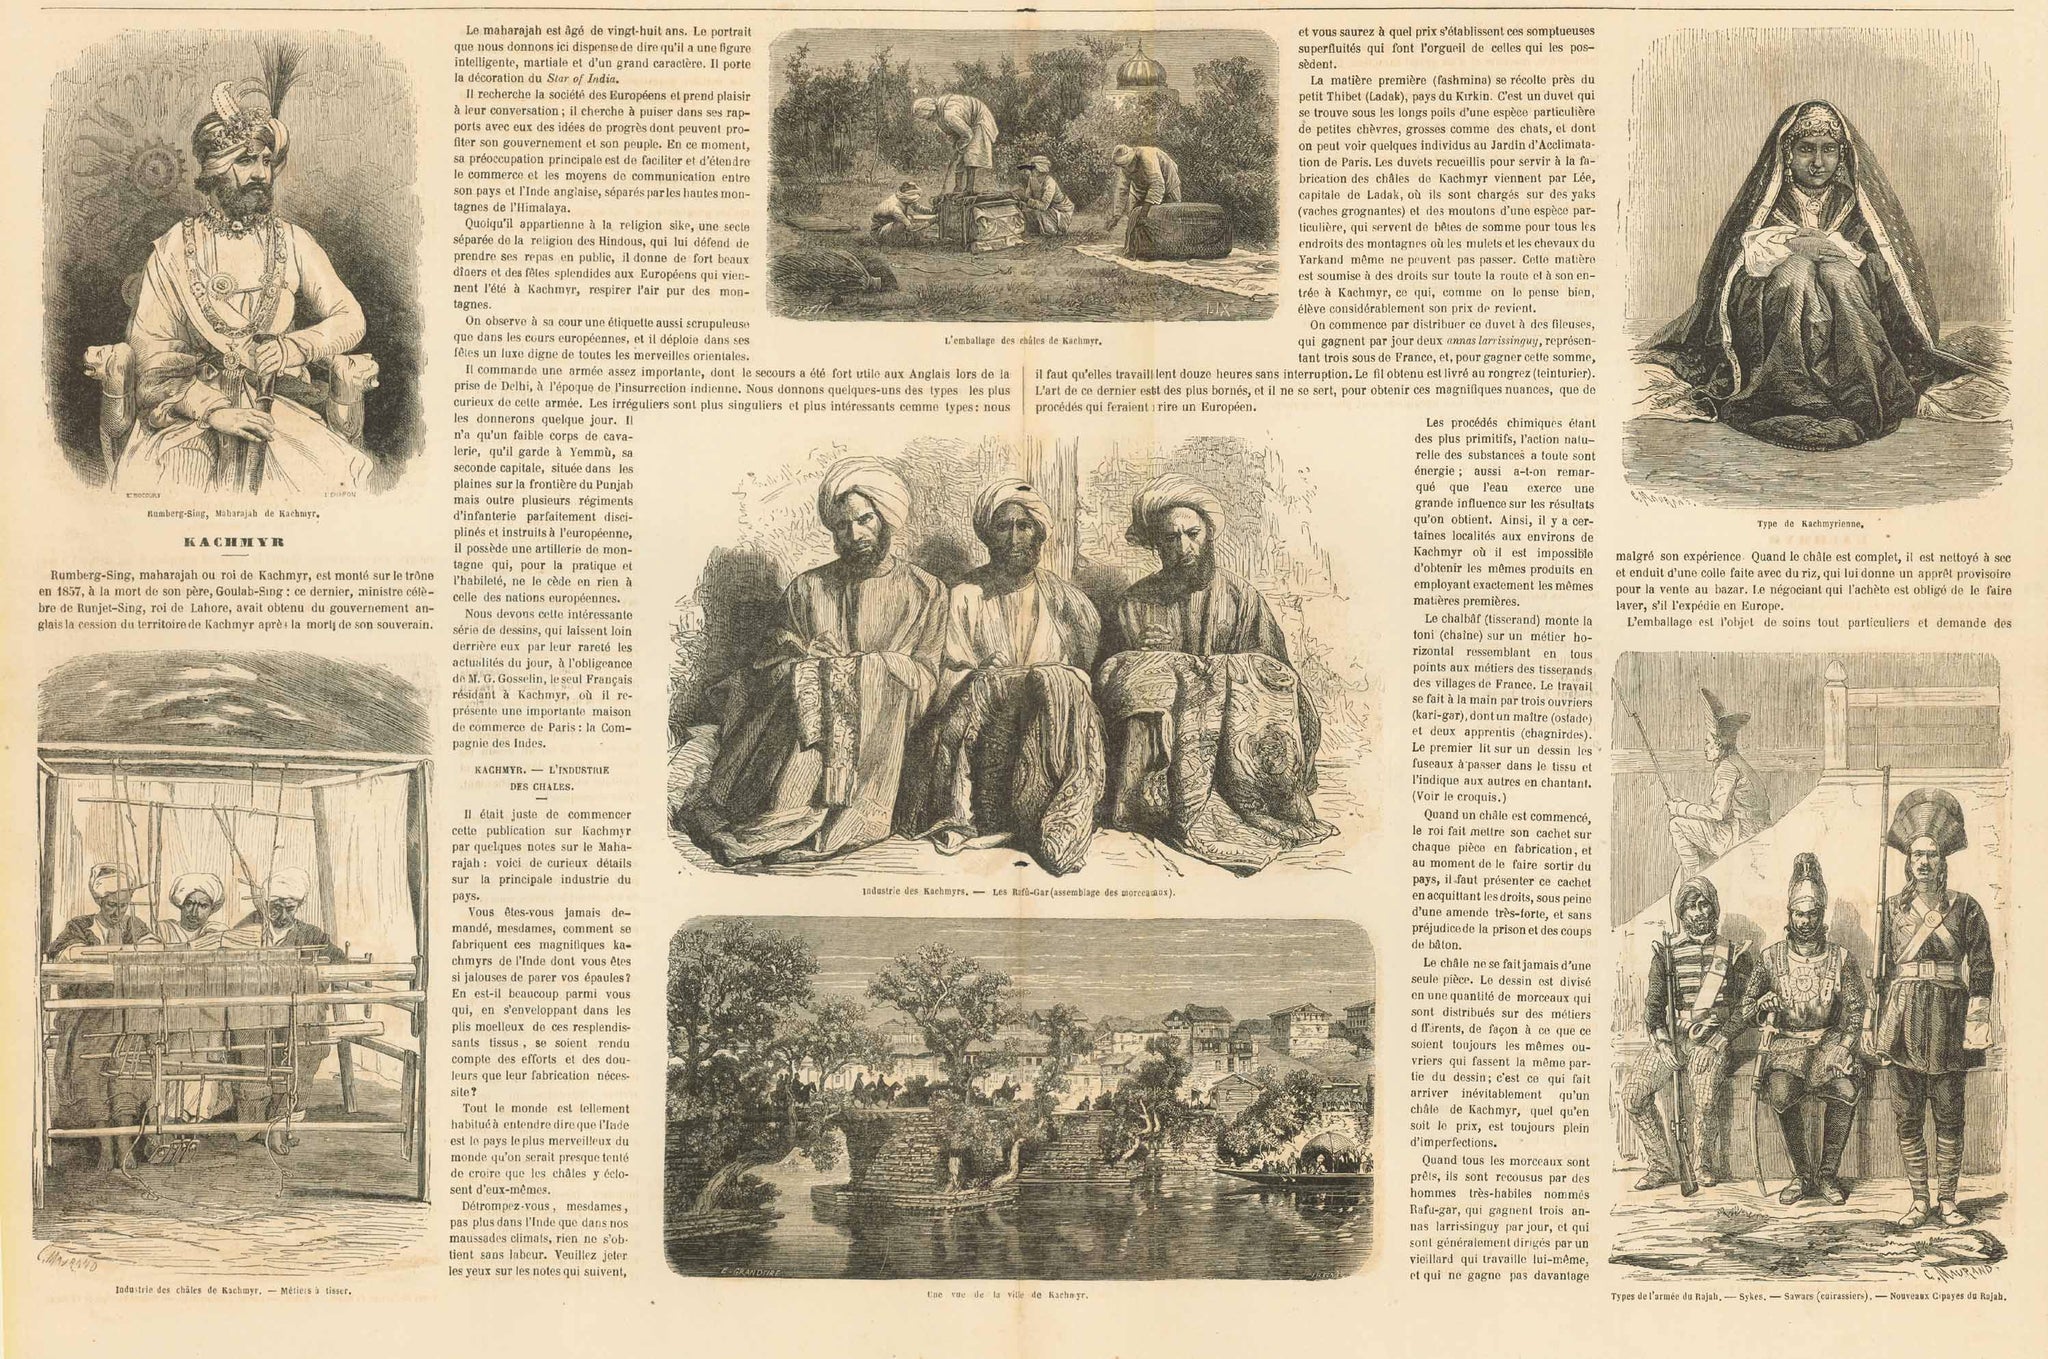 Original antique print  Himalaya, Kashmir, Weavers of scarfs, Soldiers, Woman so Kashmir, Maharaja, Hindoo, Hindu "Kachmyr" - Kashmir  7 wood engravings on a double page  Clean and well preserved with a center fold. Reverse side with unrelated test print  Published in Paris, 1867